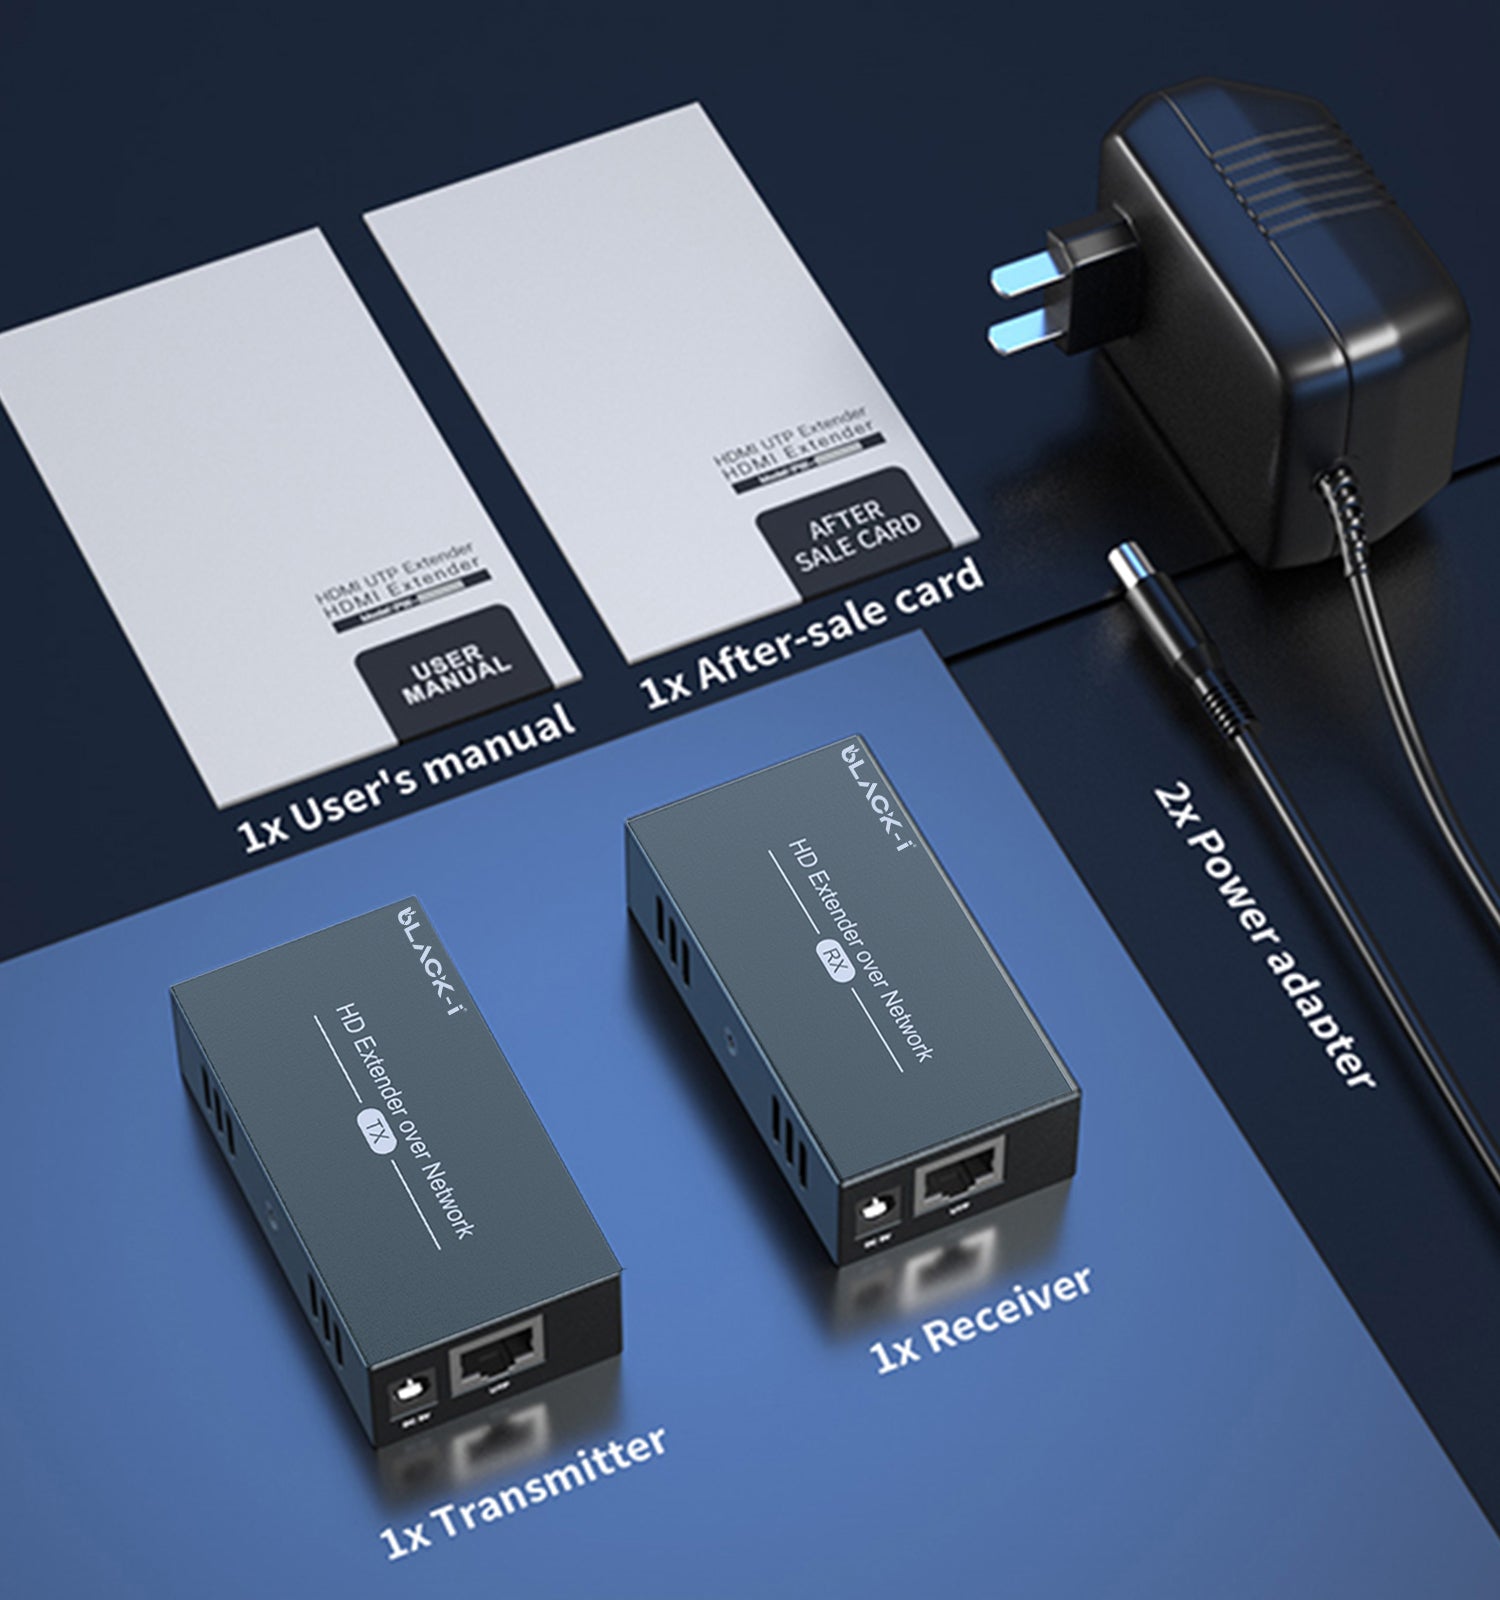 Black-i HDMI Over LAN Extender – Extend Signals up to 150 Meters for Uninterrupted Connectivity and Expanded Multimedia Reach